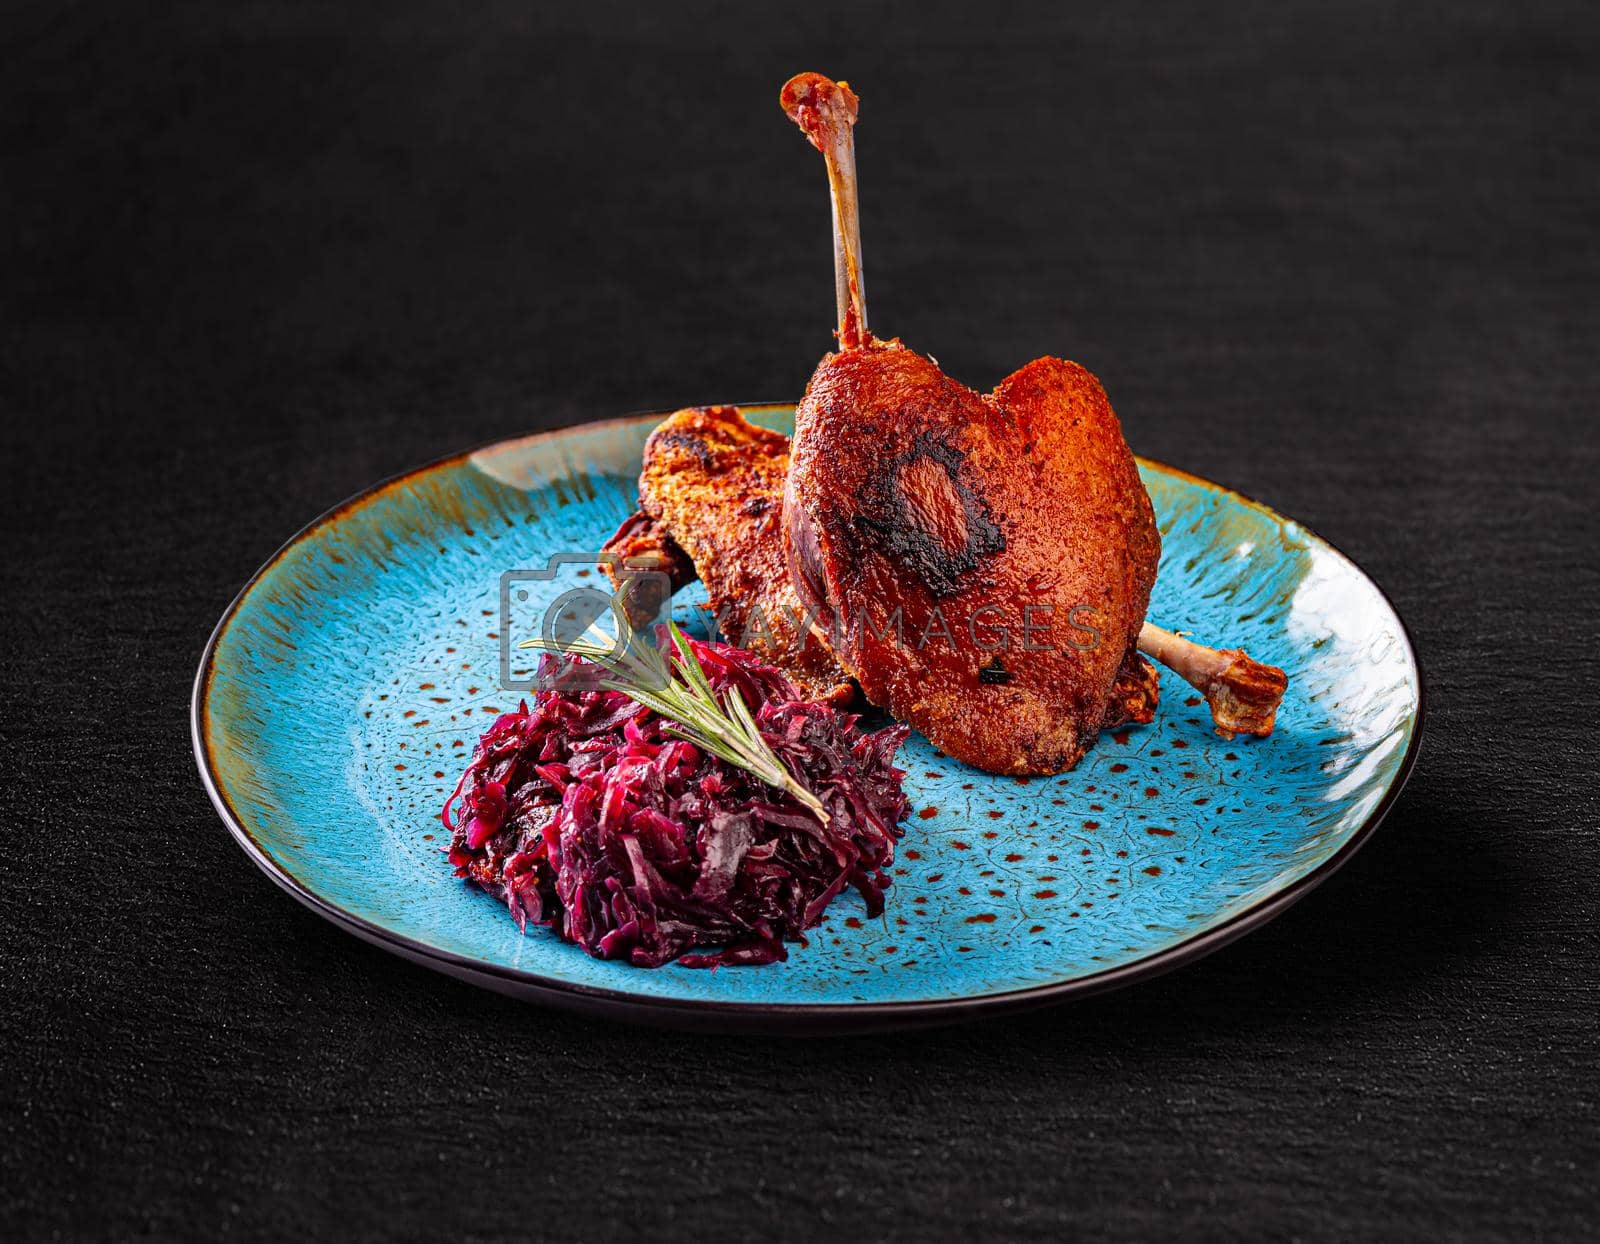 Royalty free image of Confit duck legs by grafvision